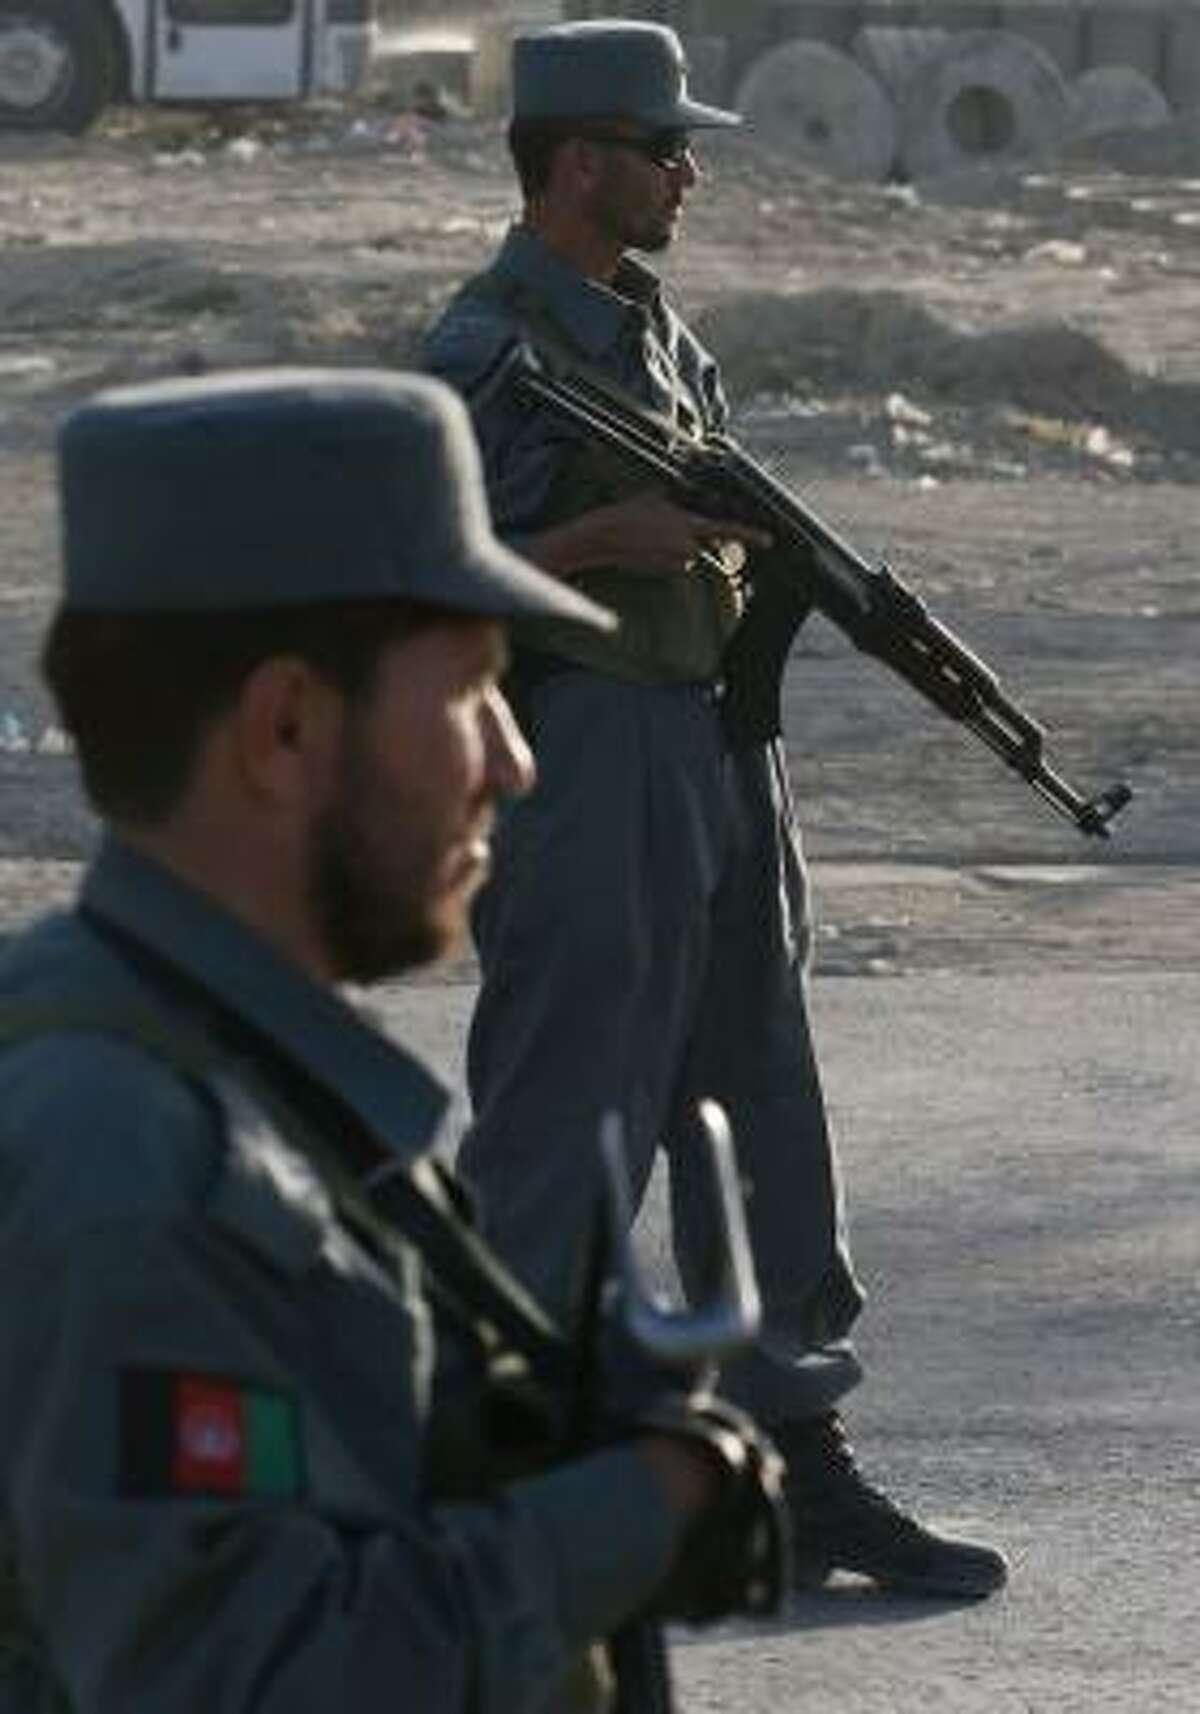 Afghan police officers stand guard at a Kabul checkpoint Monday after violence around Afghanistan killed dozens of people.